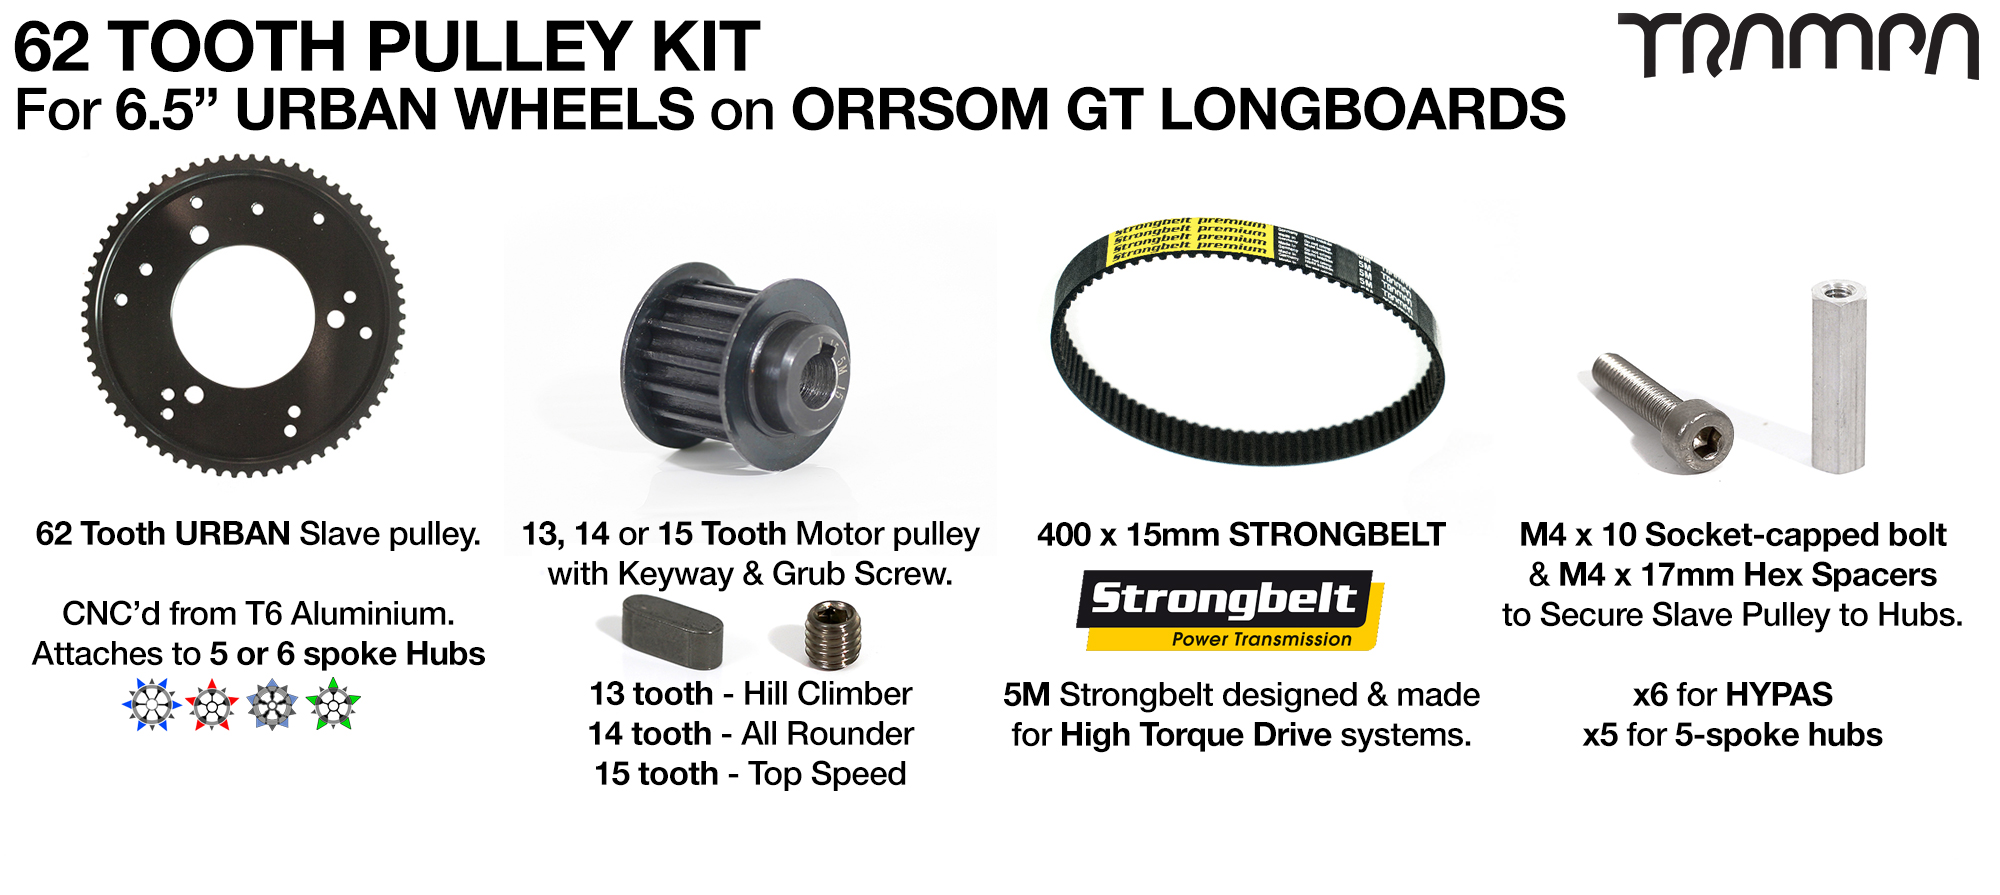 14FiFties Trucks ORRSOM Longboard Pulley kit with 62 Tooth Slave & 415mm x 15mm Belt to fit 6.5 Inch URBAN TREADS Tyres